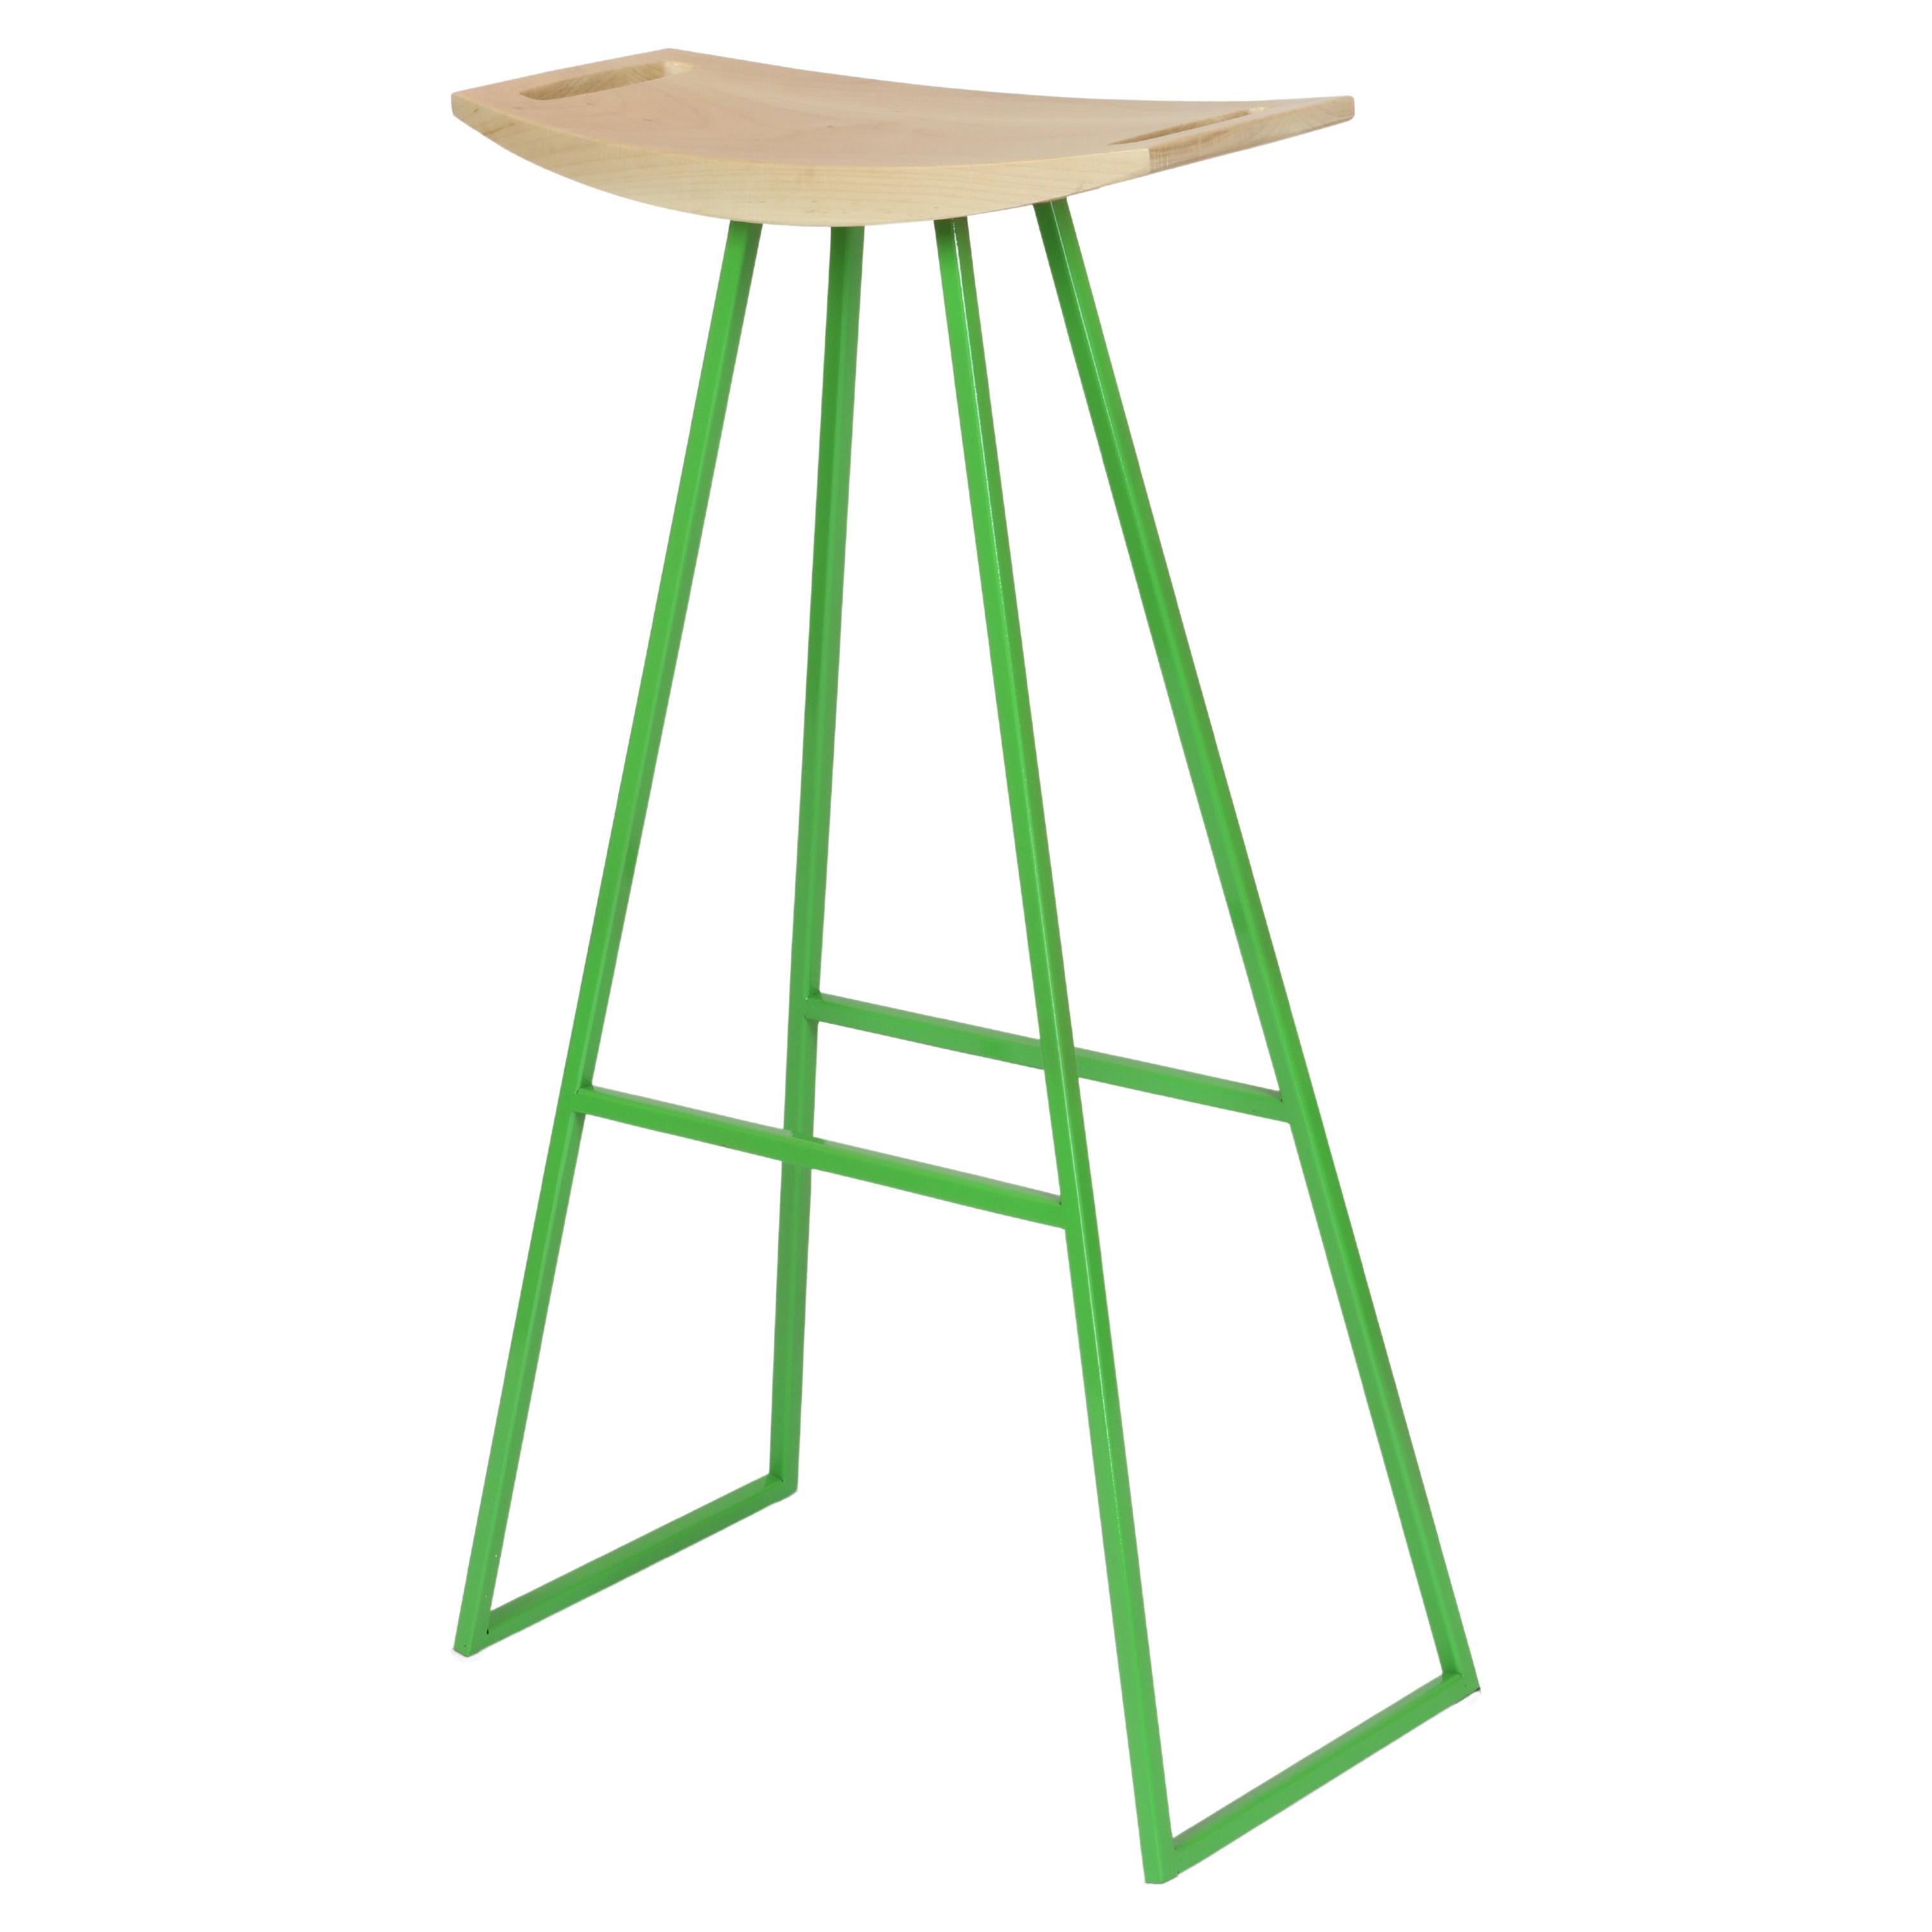 Roberts Bar Stool Maple Green For Sale